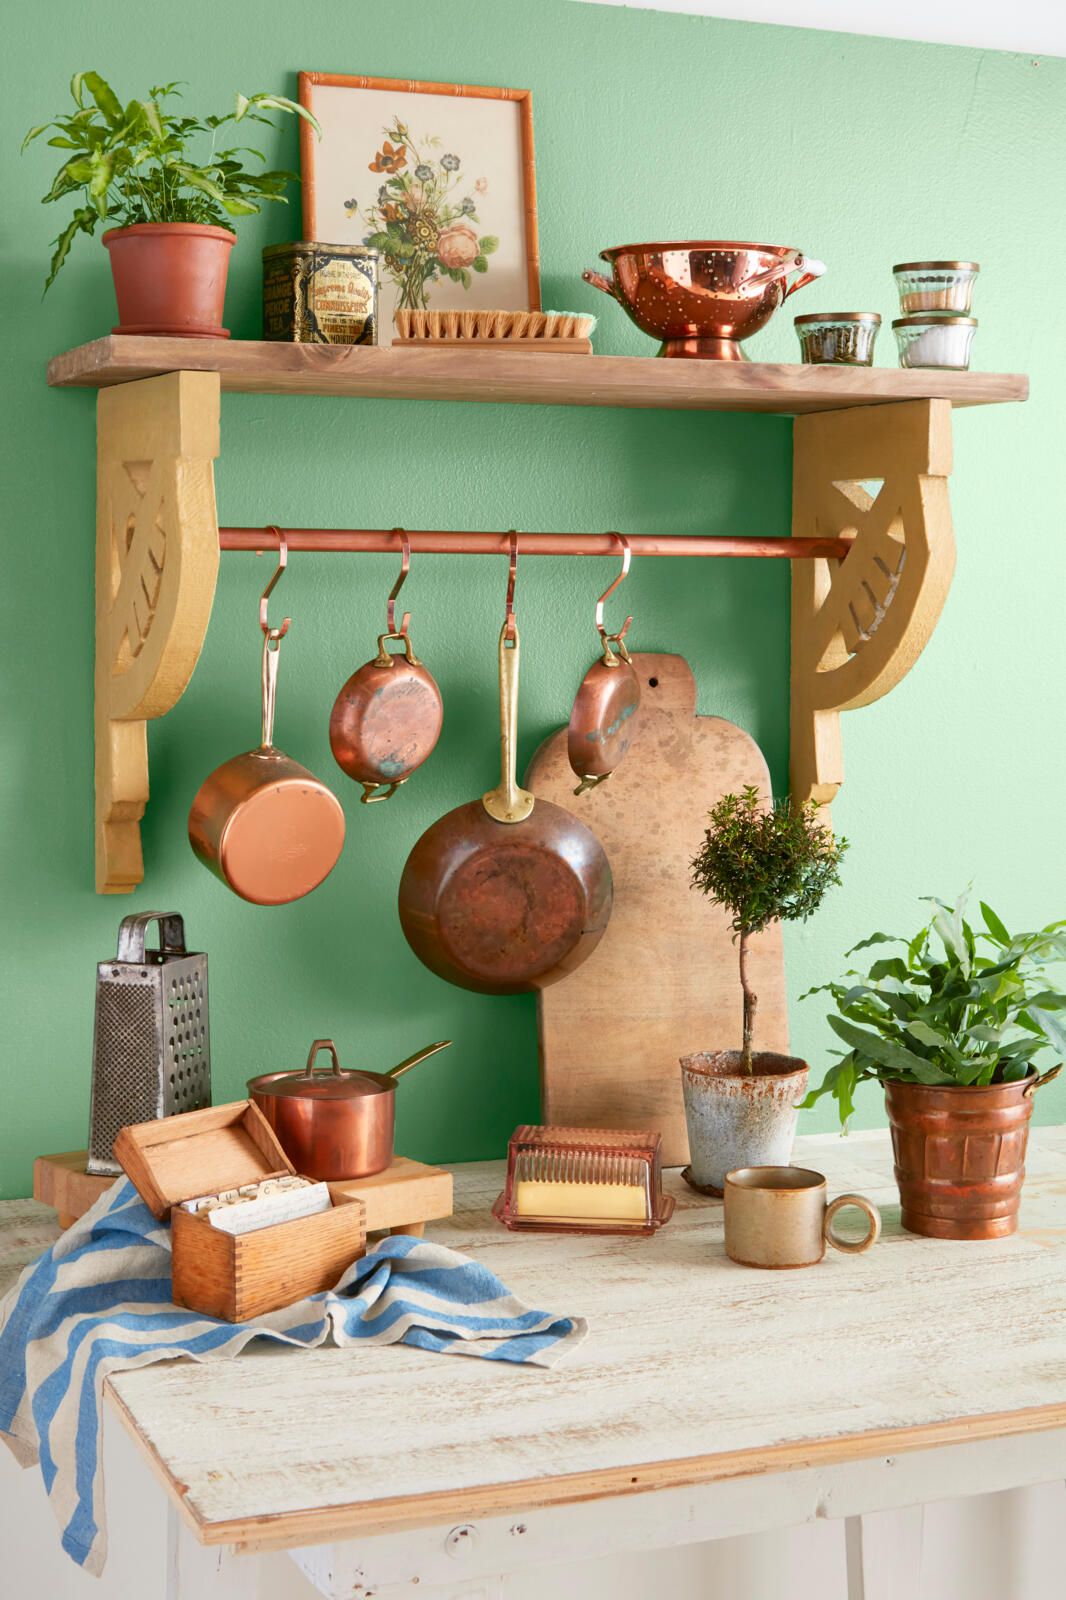 diy gifts for your boyfriend kitchen shelf made with corbels